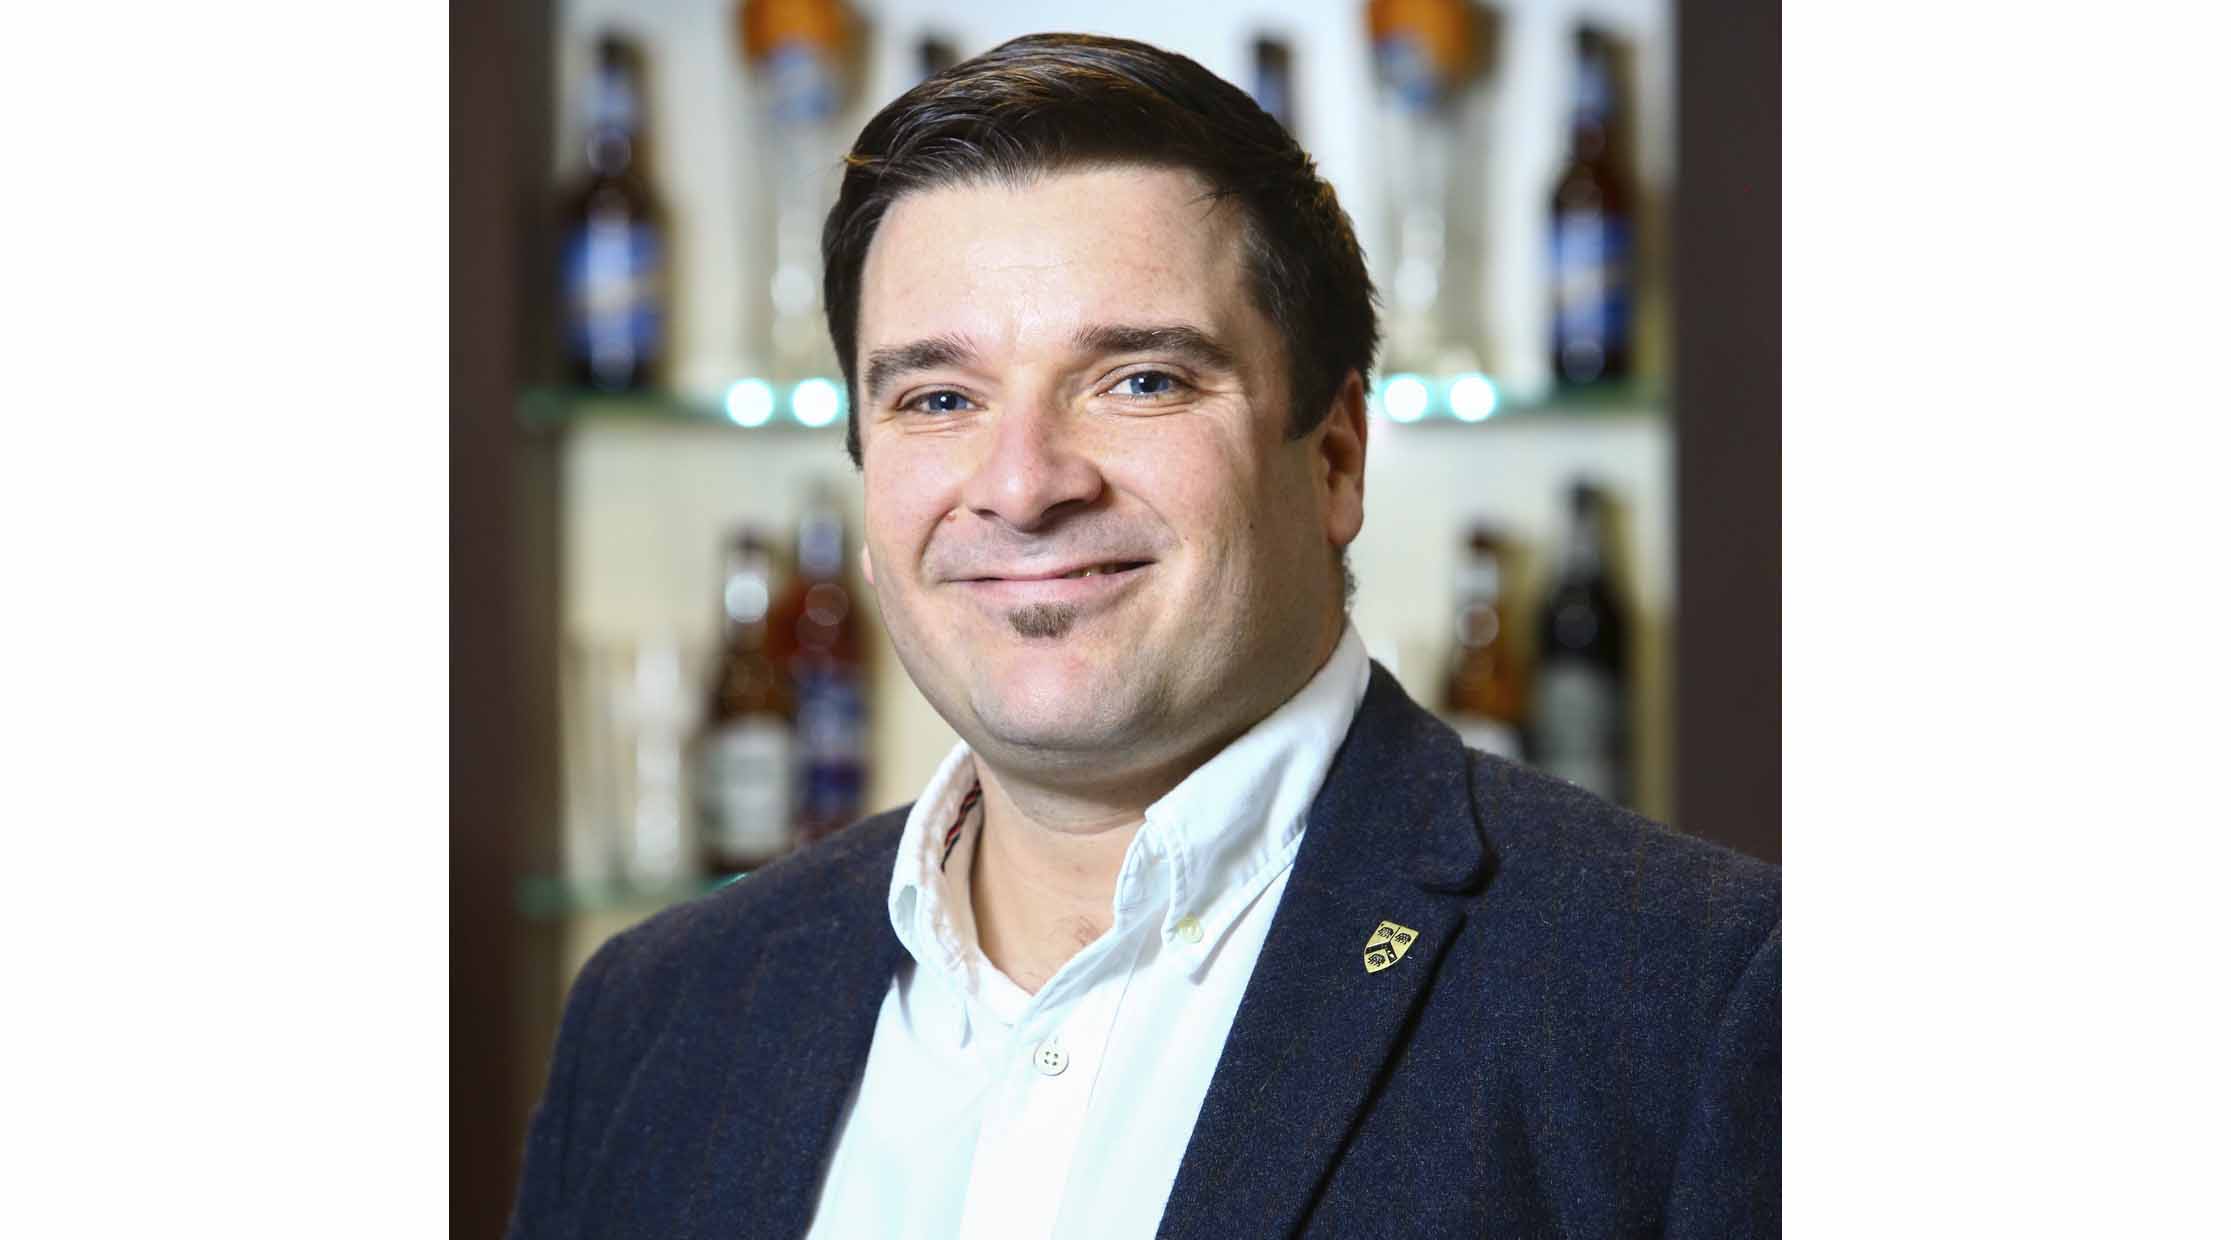 “We believe we've a responsibility to champion sustainability in the brewing industry and removing single-use plastic from our packaging is one of the ways we're meeting that responsibility as part of Our Imprint 2025 sustainability goals,” said Ryan McFarland, Regional Business Director for Western Europe at Molson Coors Beverage Company.